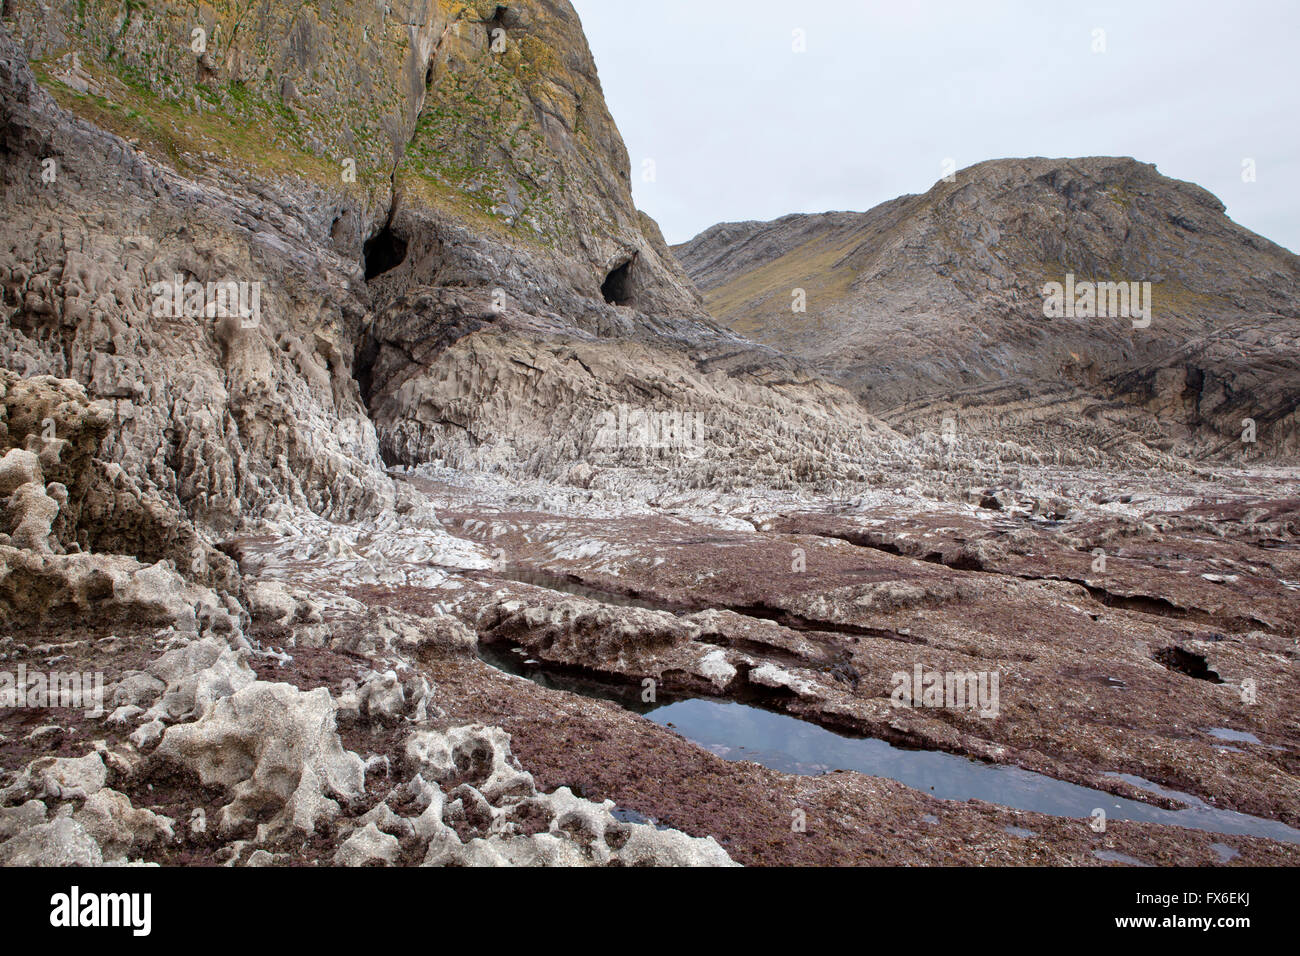 Shoreline below Paviland Cave, low spring tide. The cave is visible in the cliff face. Stock Photo